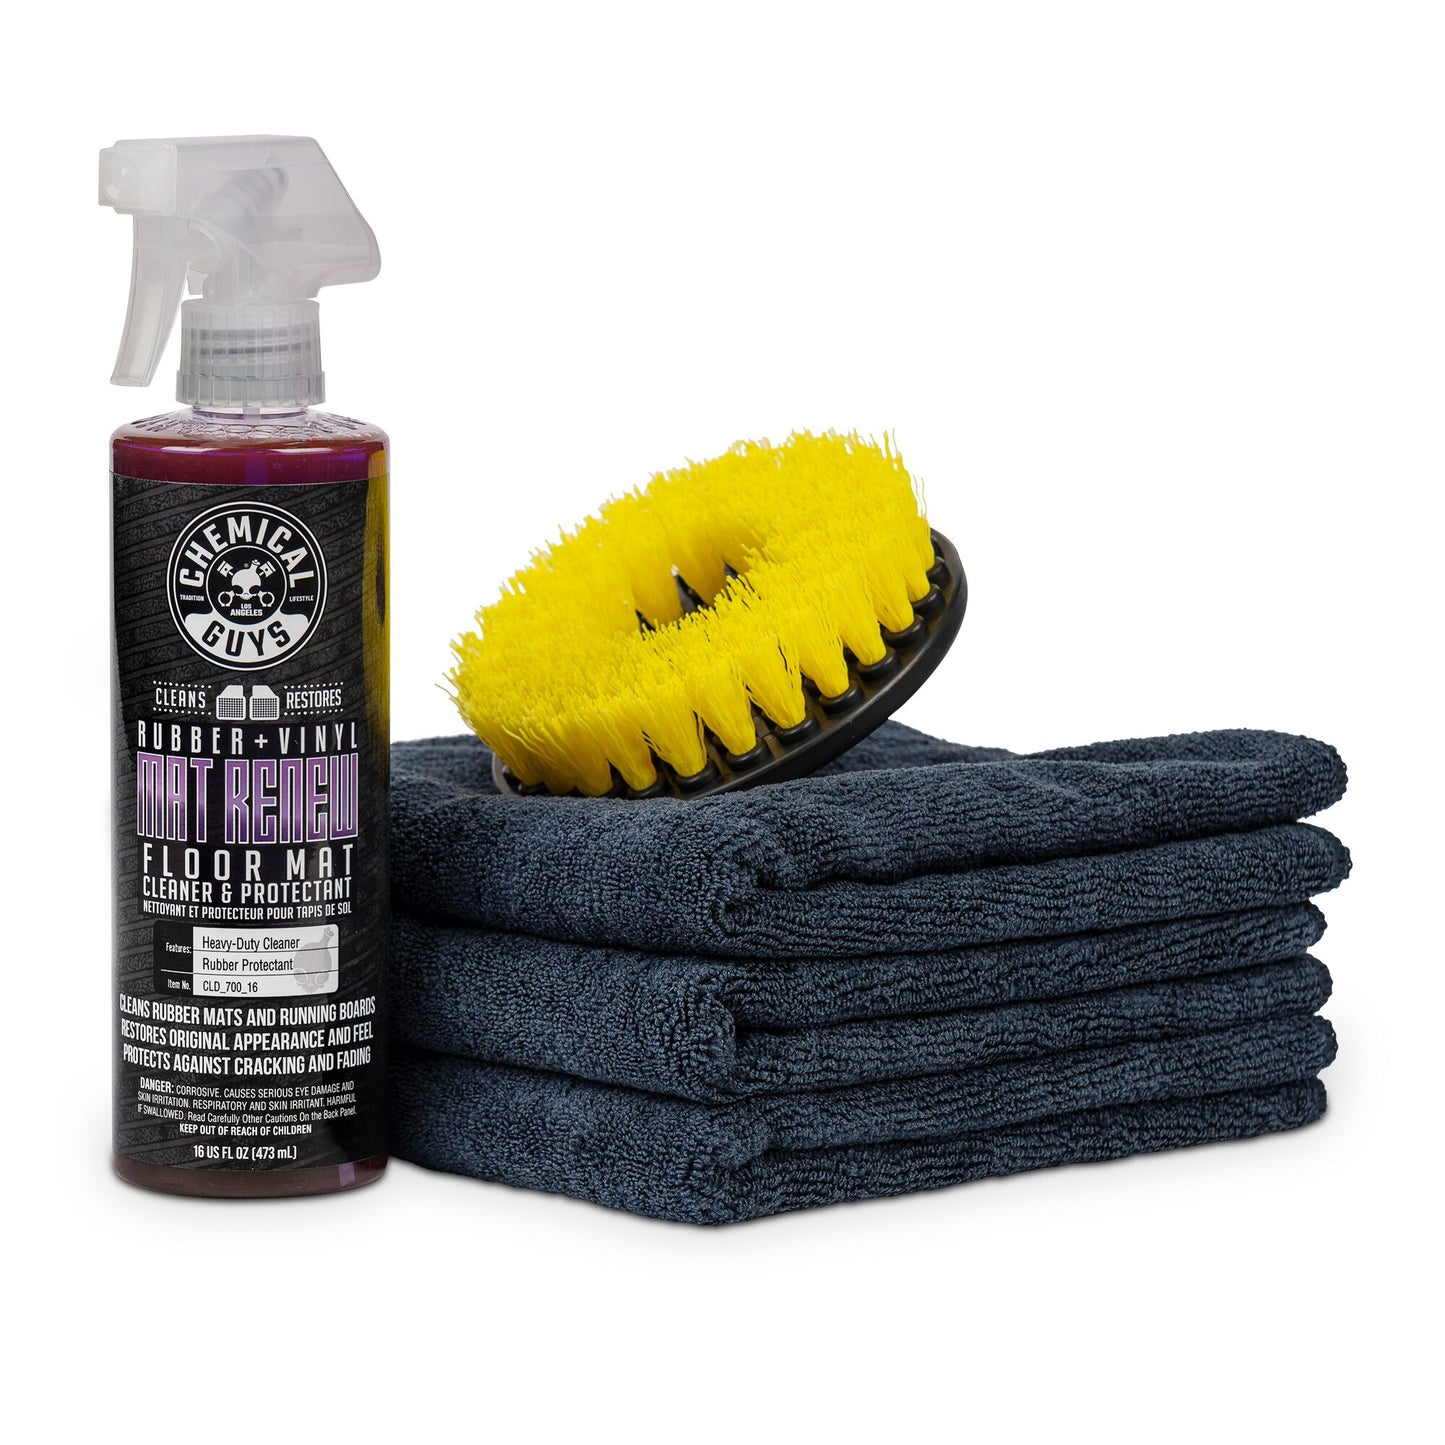 Rubber and Vinyl Floor Mat Cleaning Kit